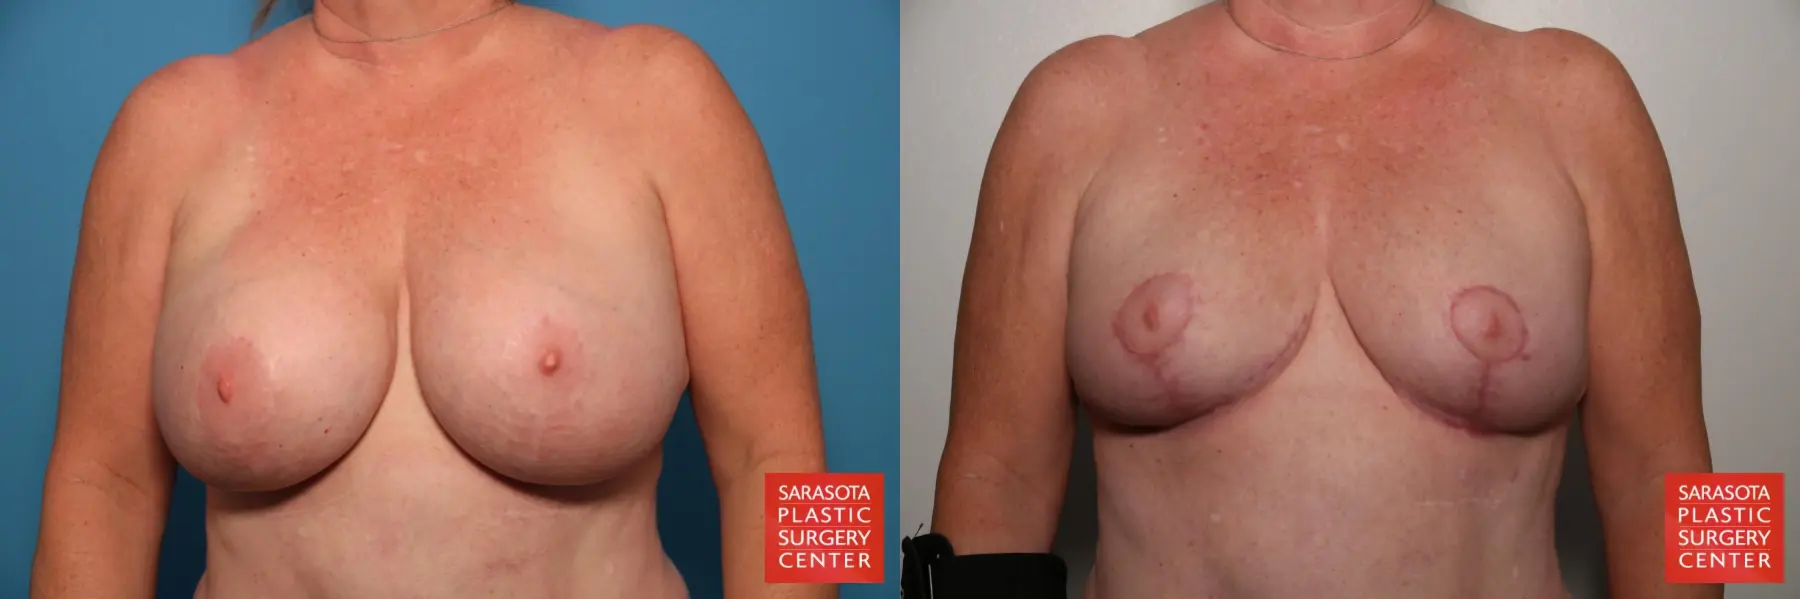 Breast Implant Removal With Lift: Patient 2 - Before and After 1